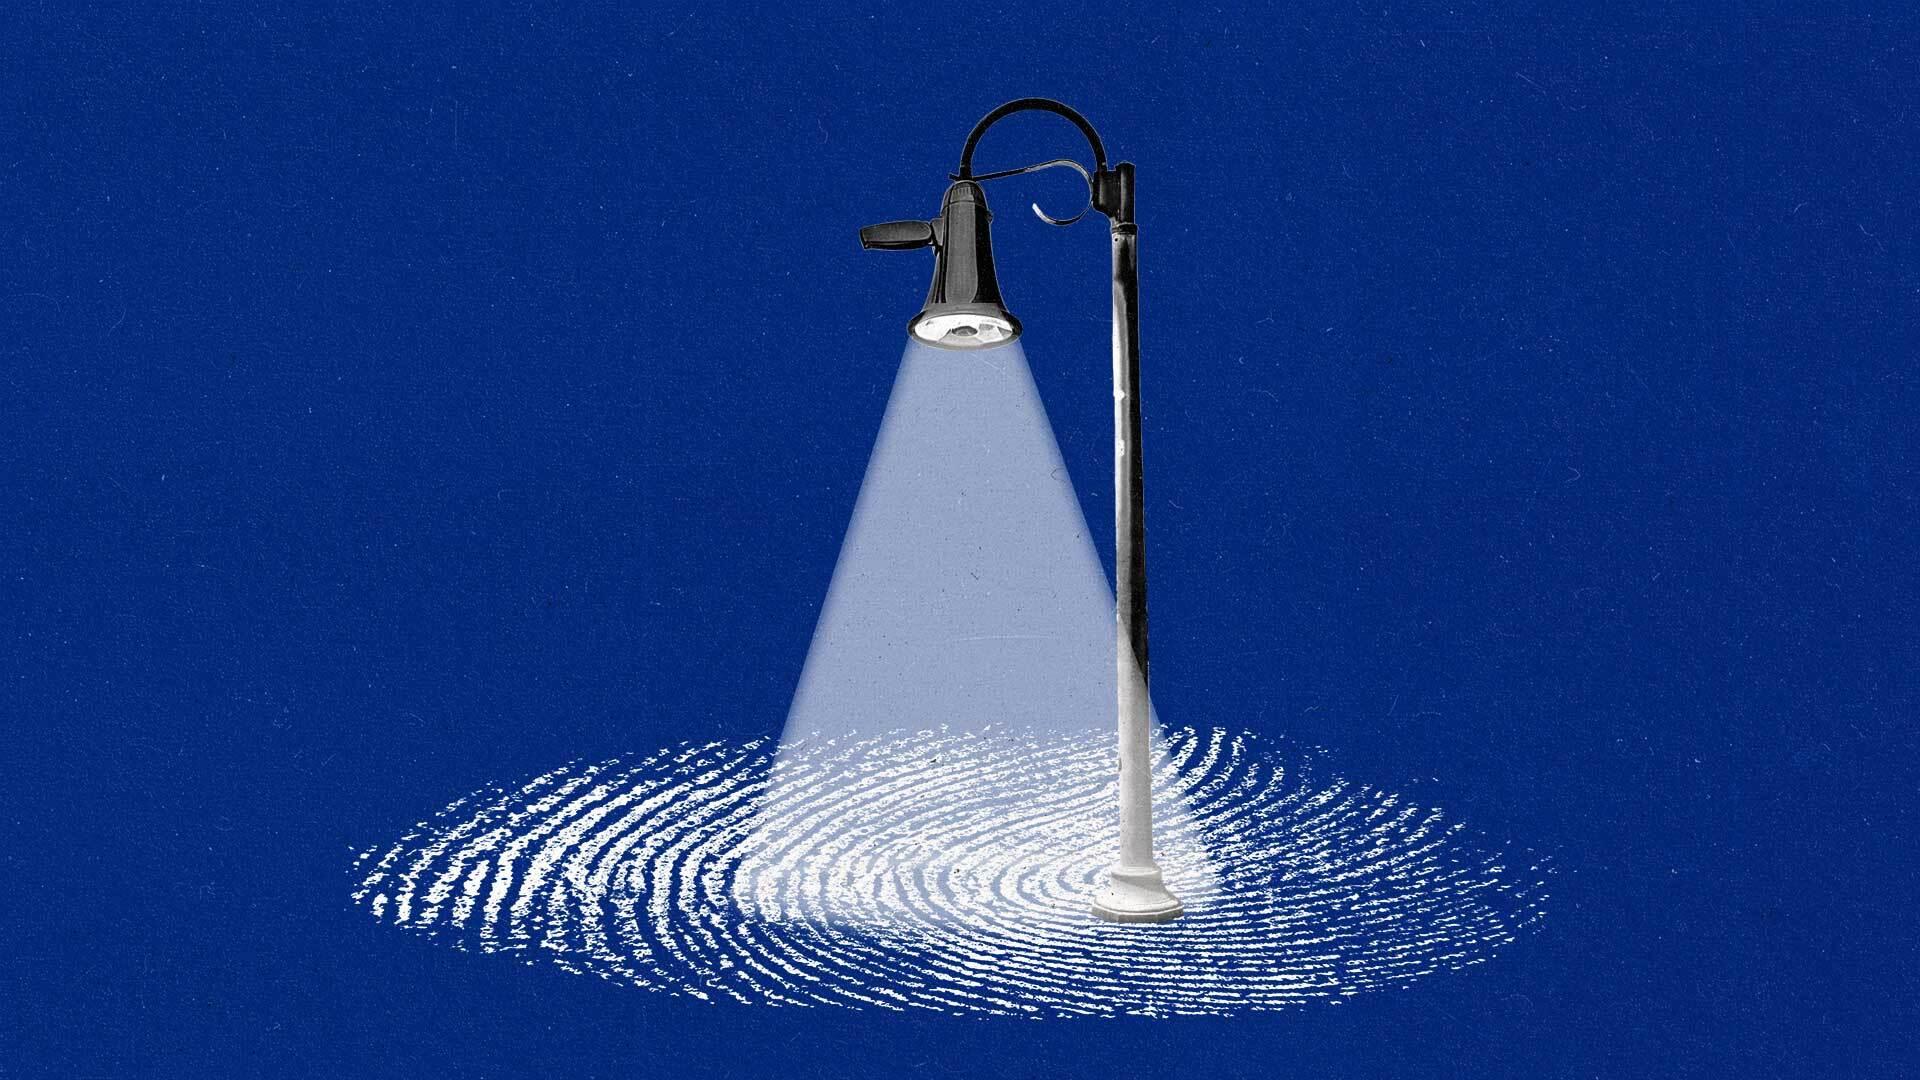 A streetlight with a megaphone as a lamp shines down on part of a large fingerprint.